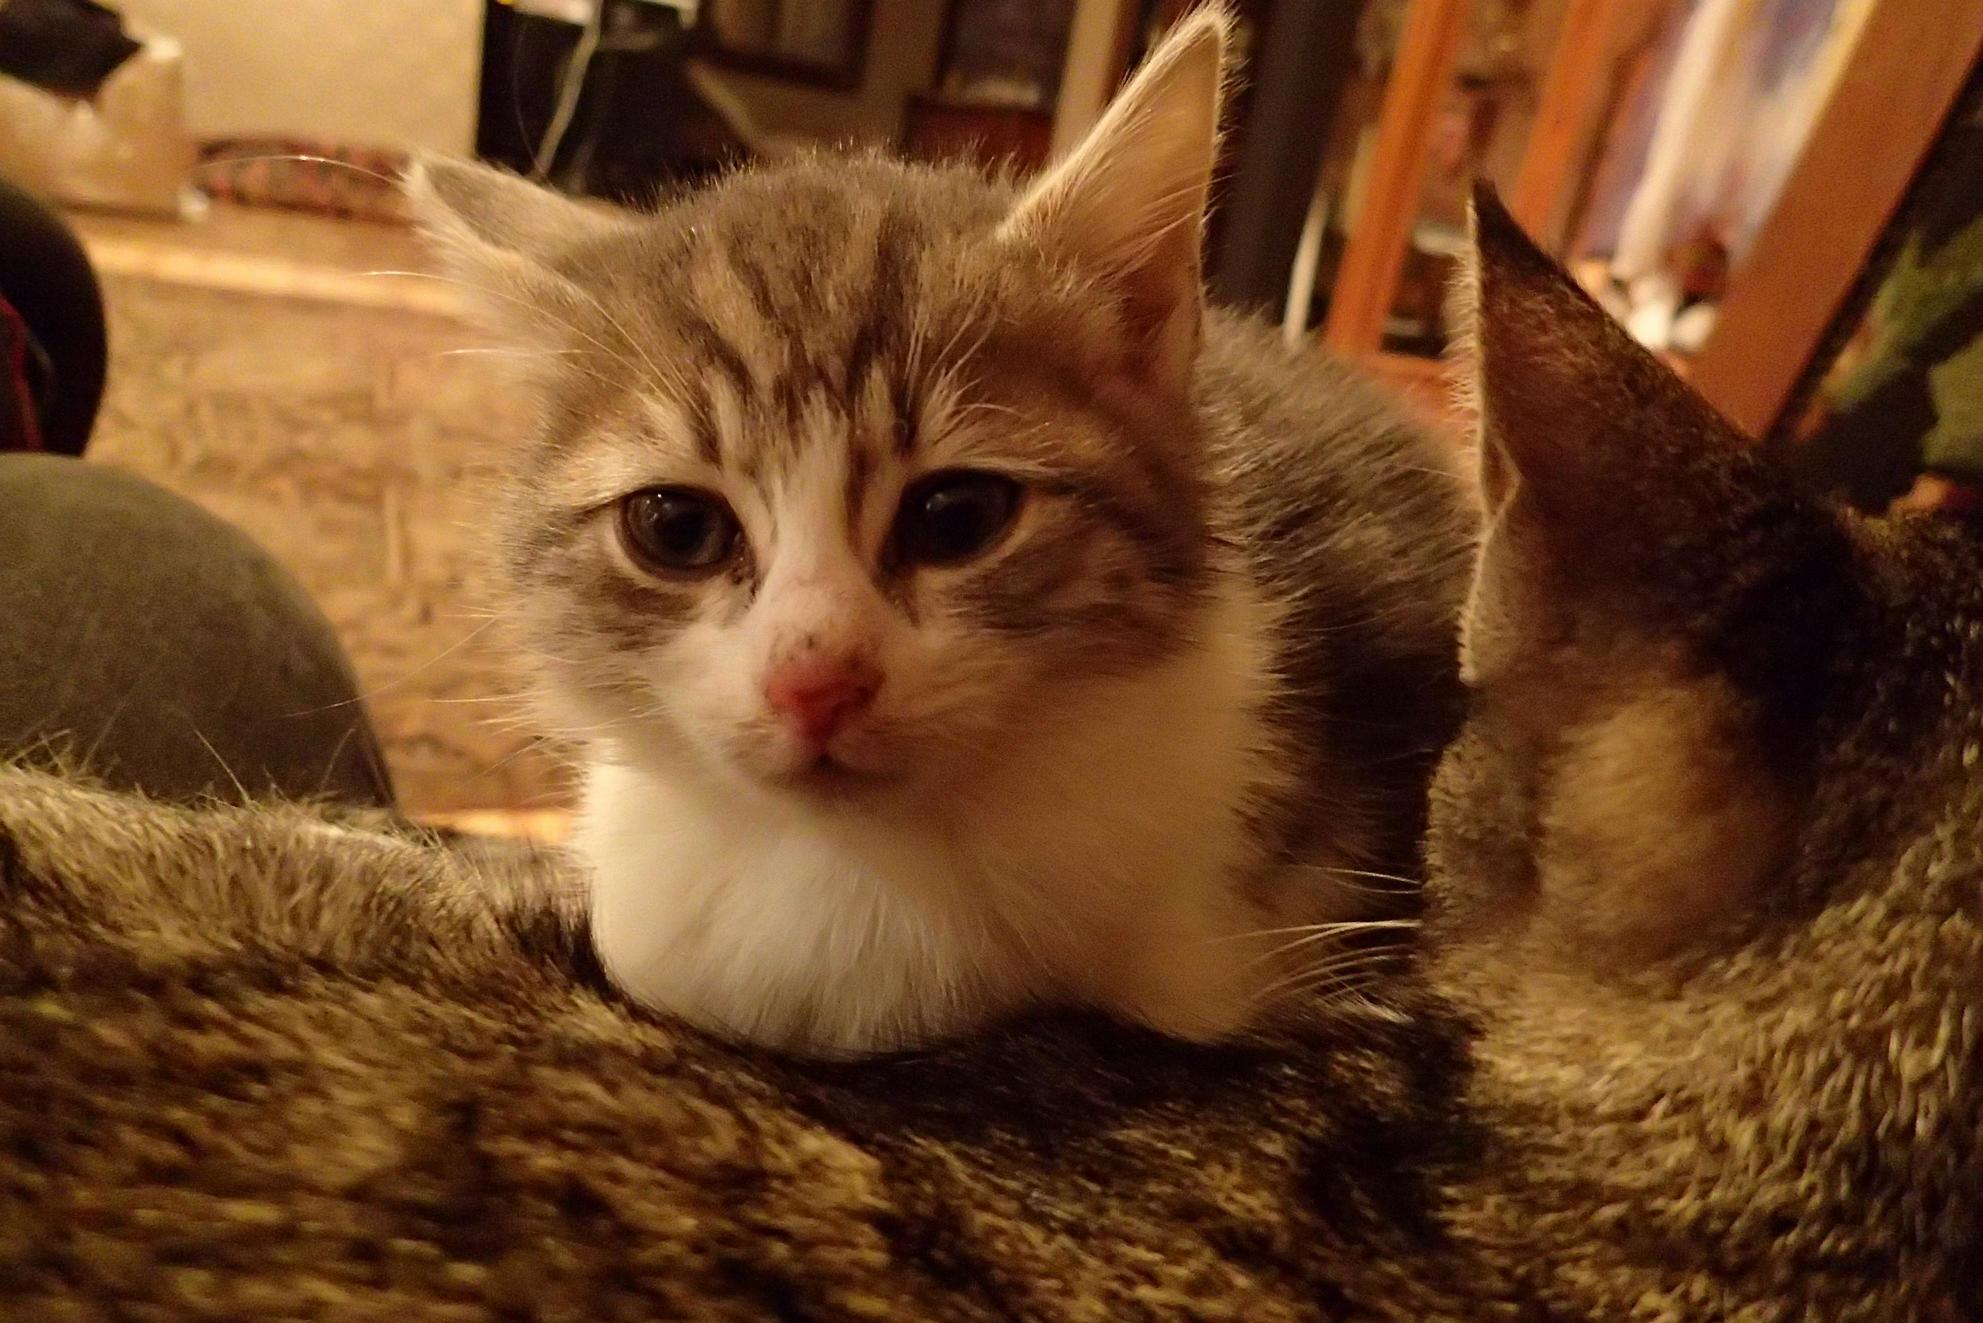 Drowsy little kitten doesnt know what to make of the camera